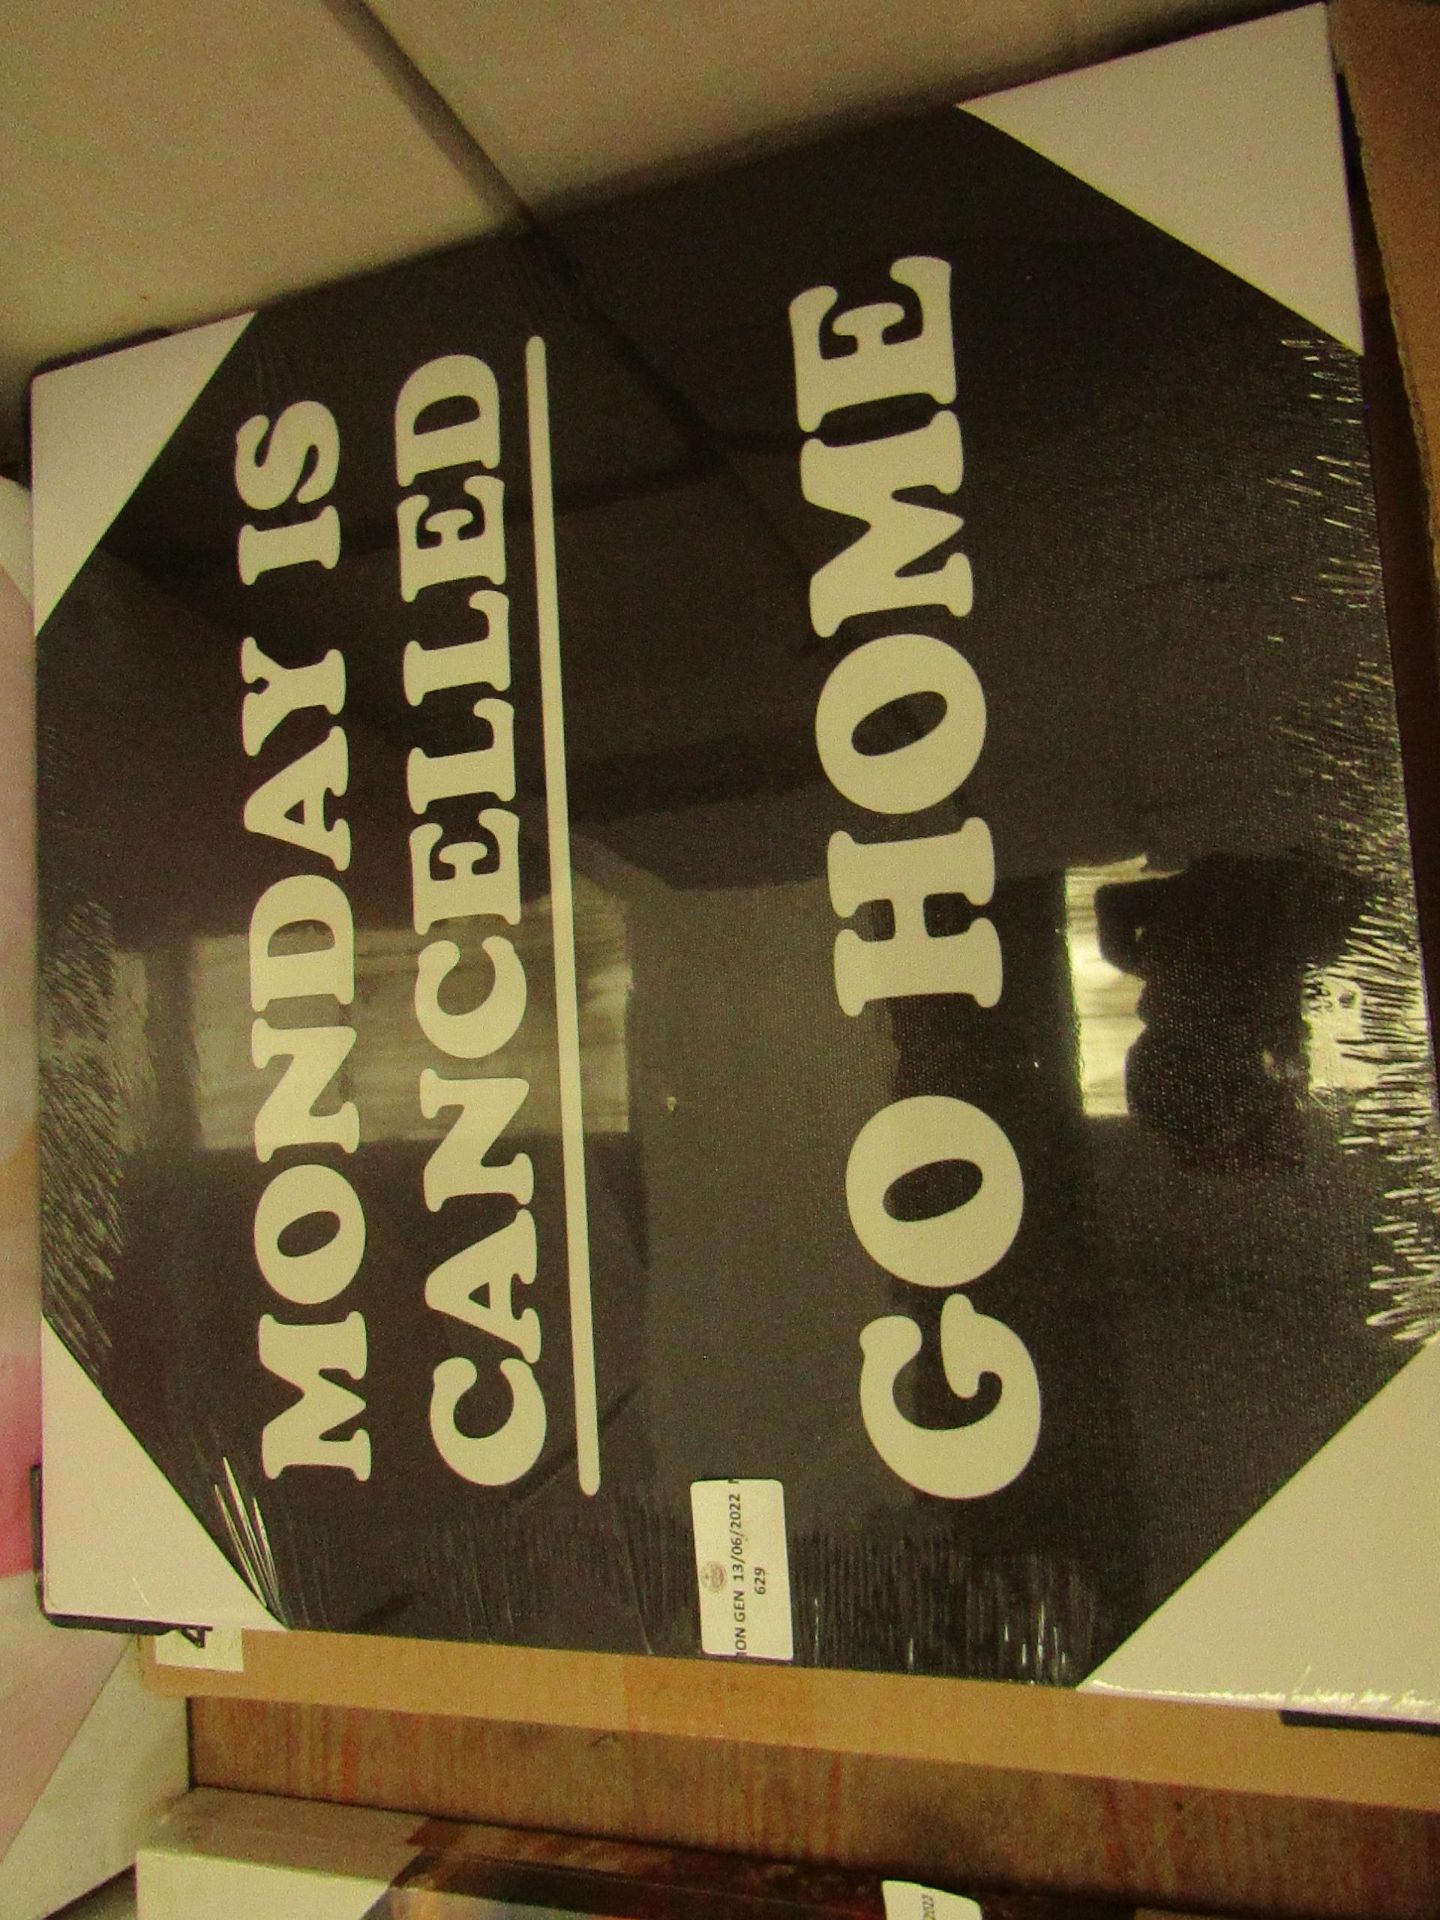 2x " Mondays Cancelled Go Home " Canvases - Unused.